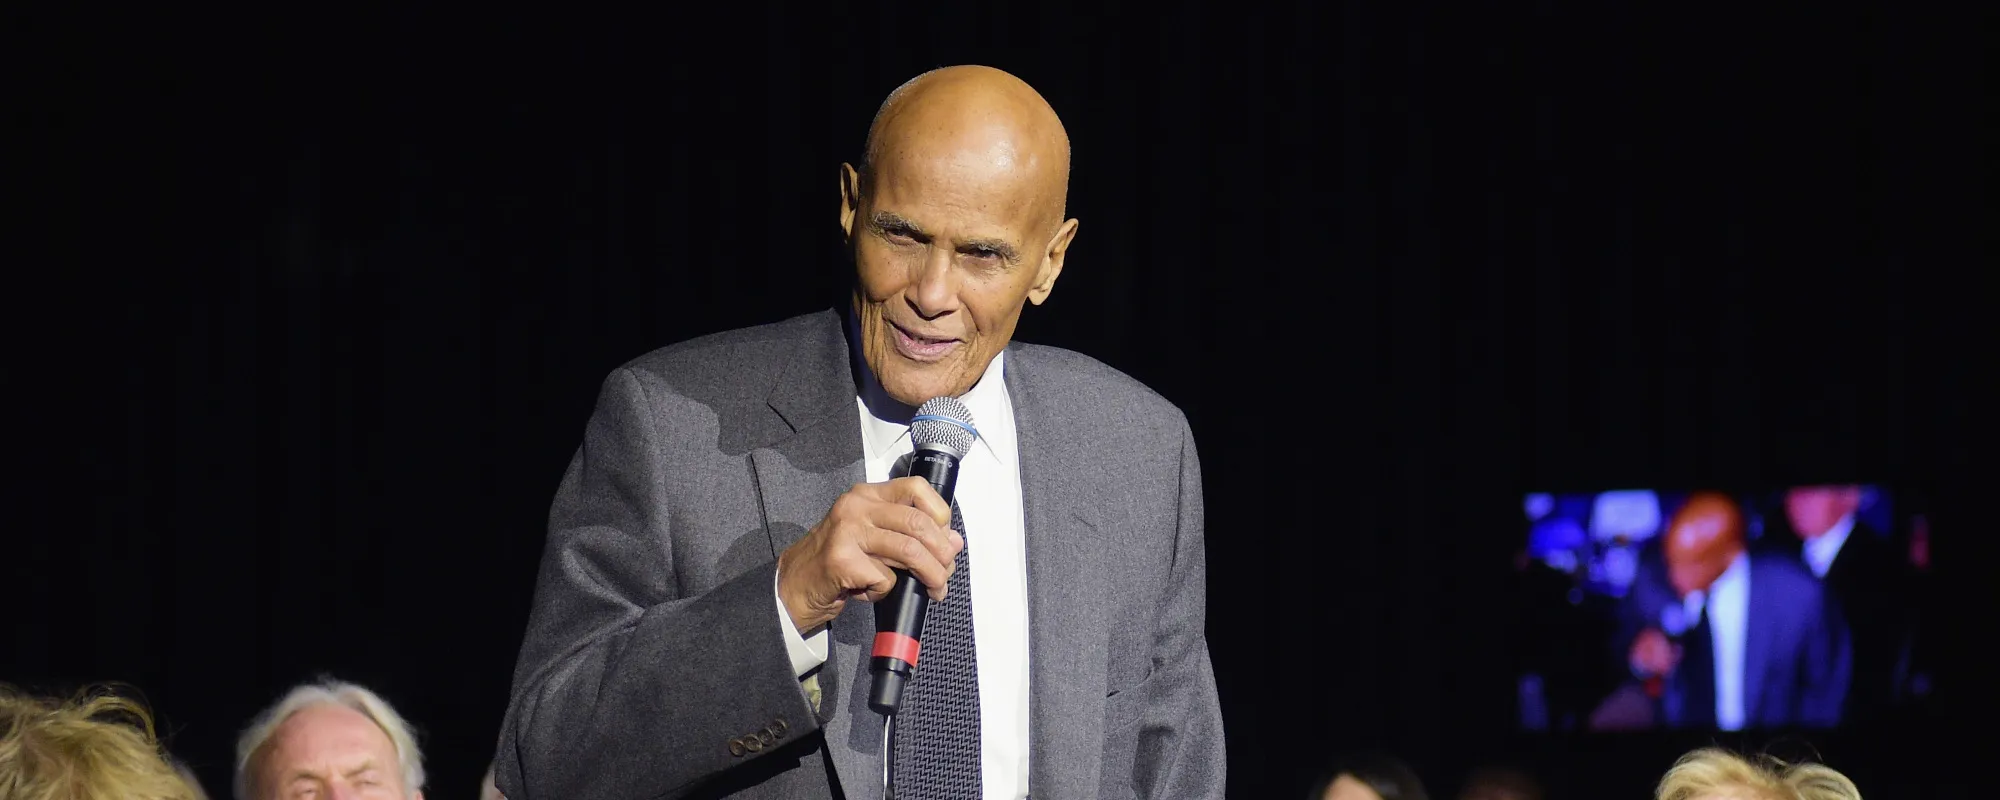 Harry Belafonte Receives Early Influence Award at HOF Ceremony, Two Albums Get Reissue